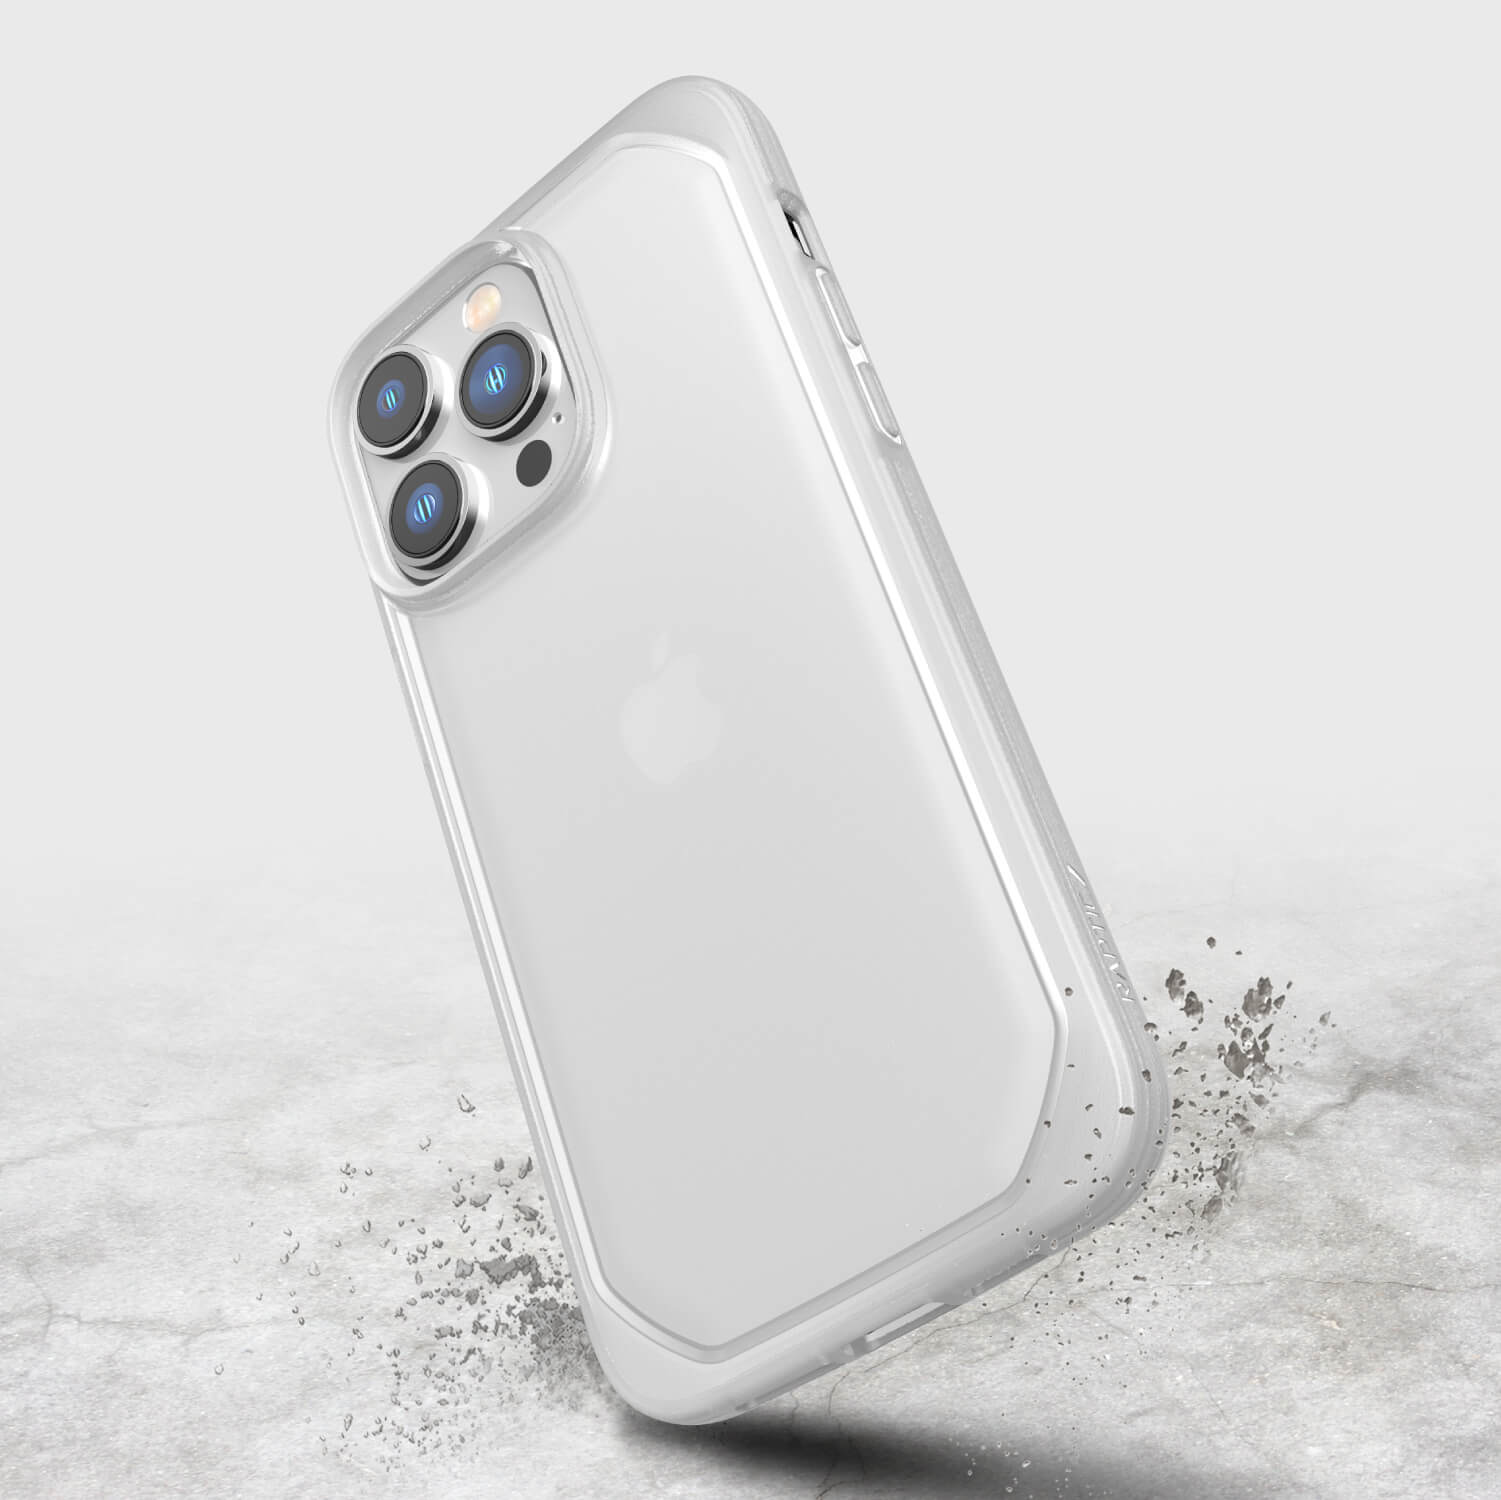 A Raptic Slim & Sleek case for the white iPhone 11 with a splash of water, achieving a texturing depth.